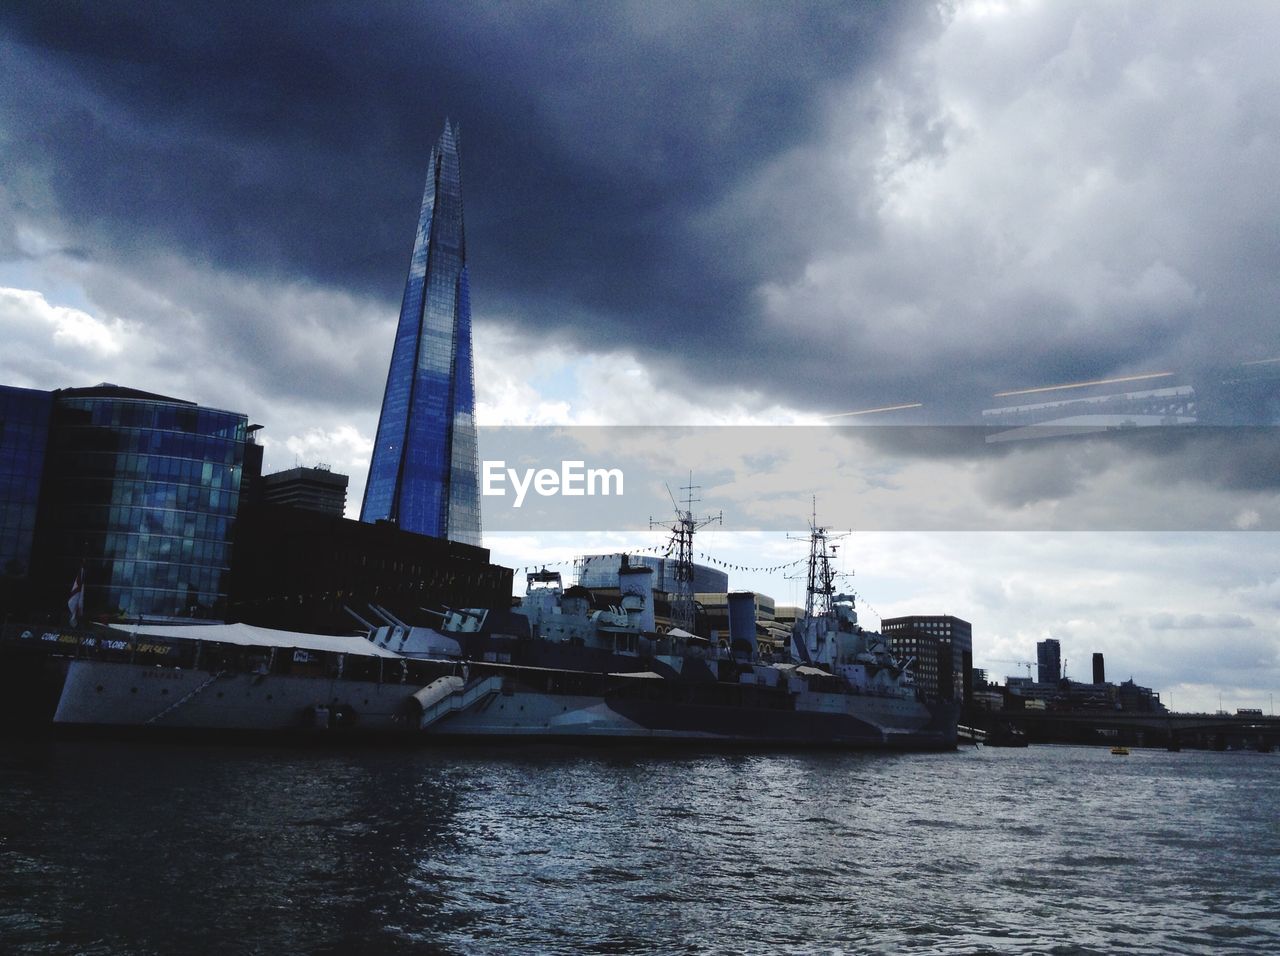 Ship moored on thames river by shard by against cloudy sky